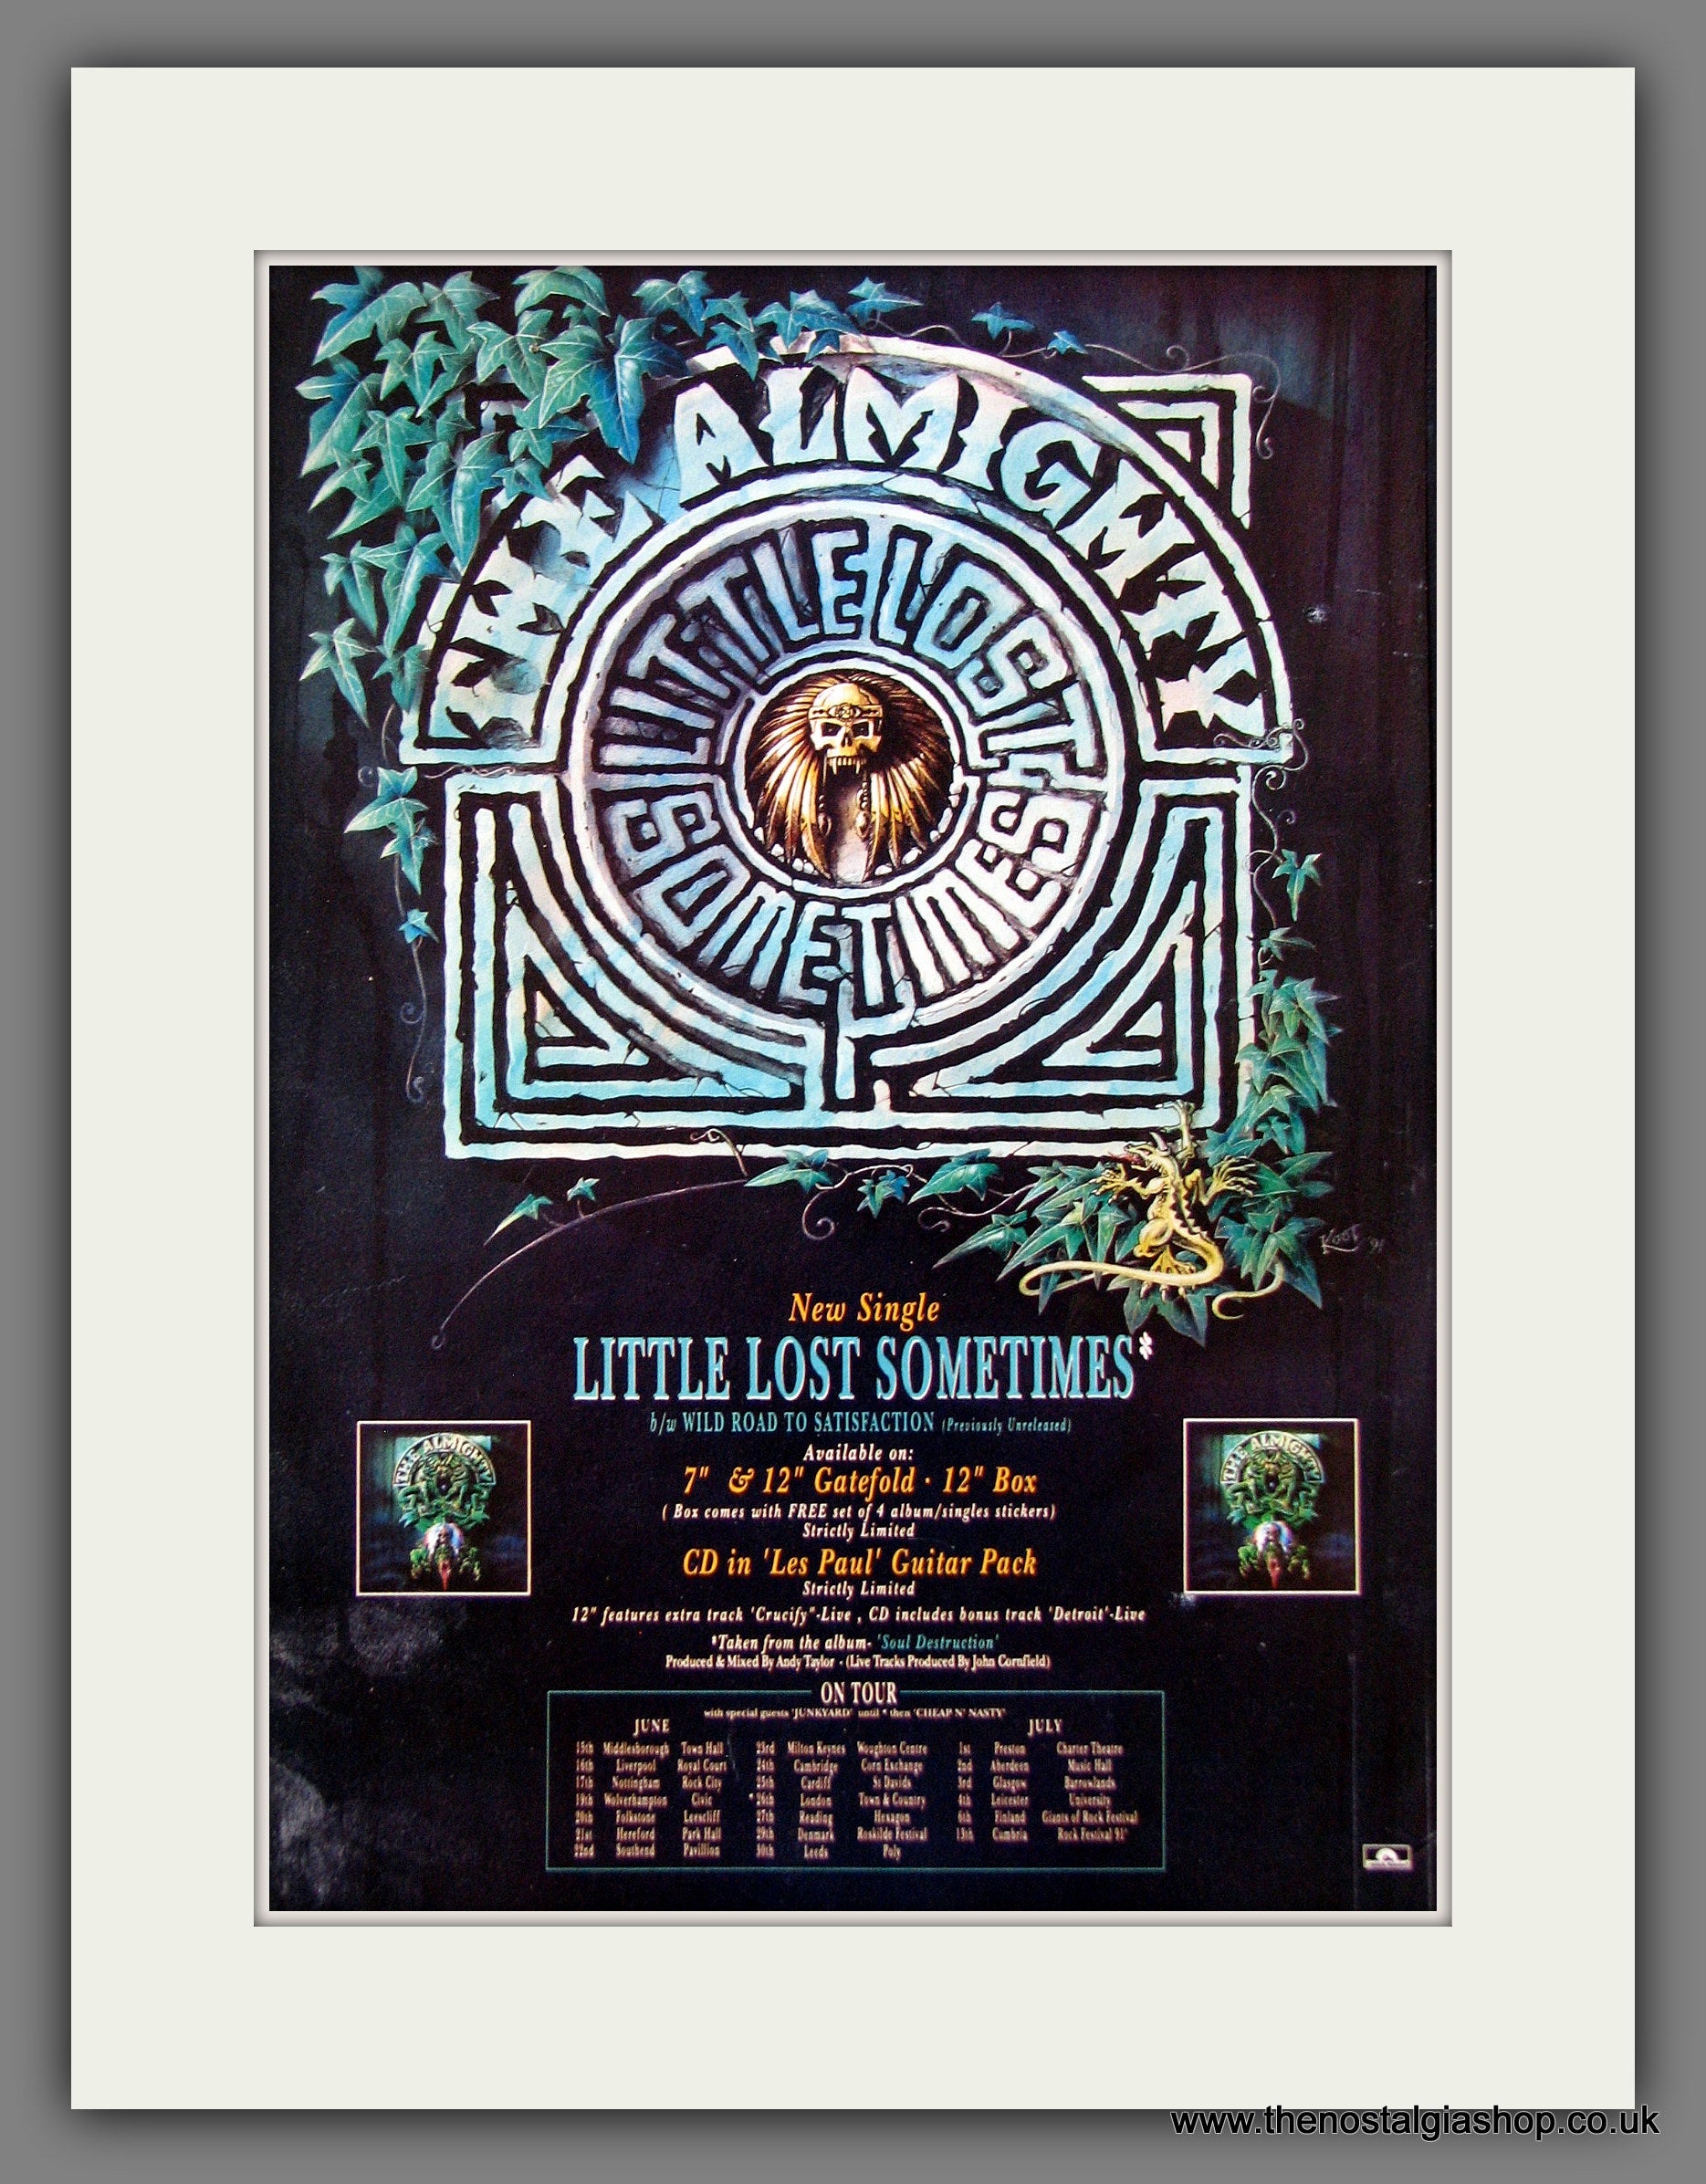 Almighty (The) Little Lost Sometimes. 1991 Original Advert (ref